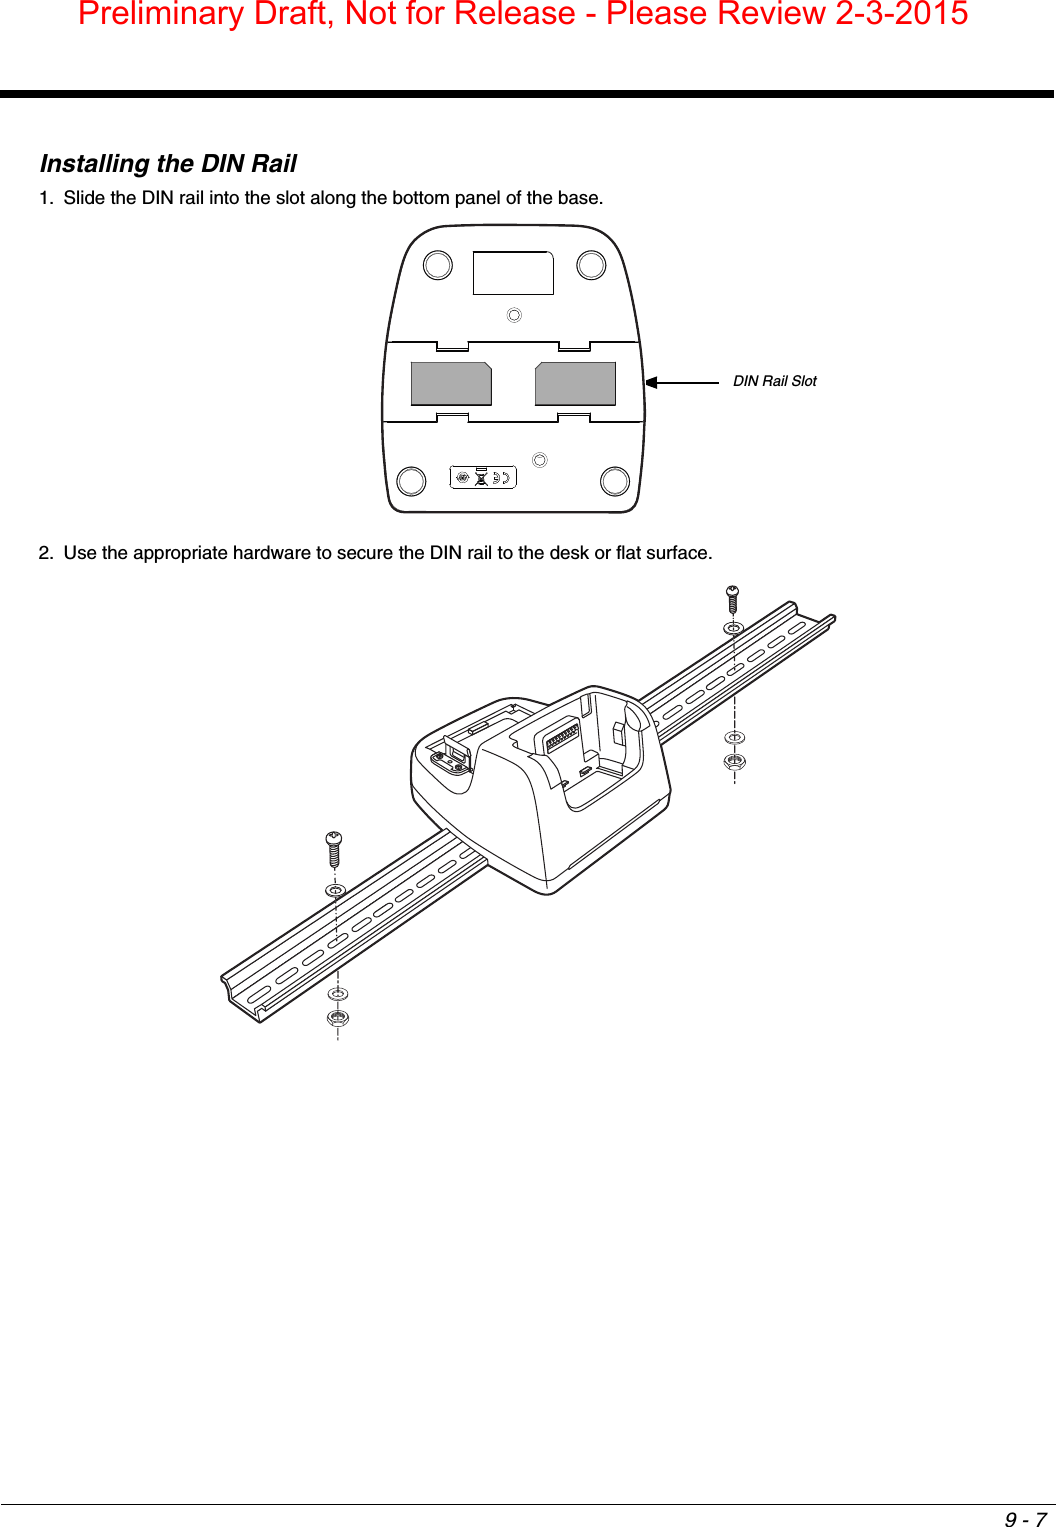 9 - 7Installing the DIN Rail1. Slide the DIN rail into the slot along the bottom panel of the base. 2. Use the appropriate hardware to secure the DIN rail to the desk or flat surface.DIN Rail SlotPreliminary Draft, Not for Release - Please Review 2-3-2015